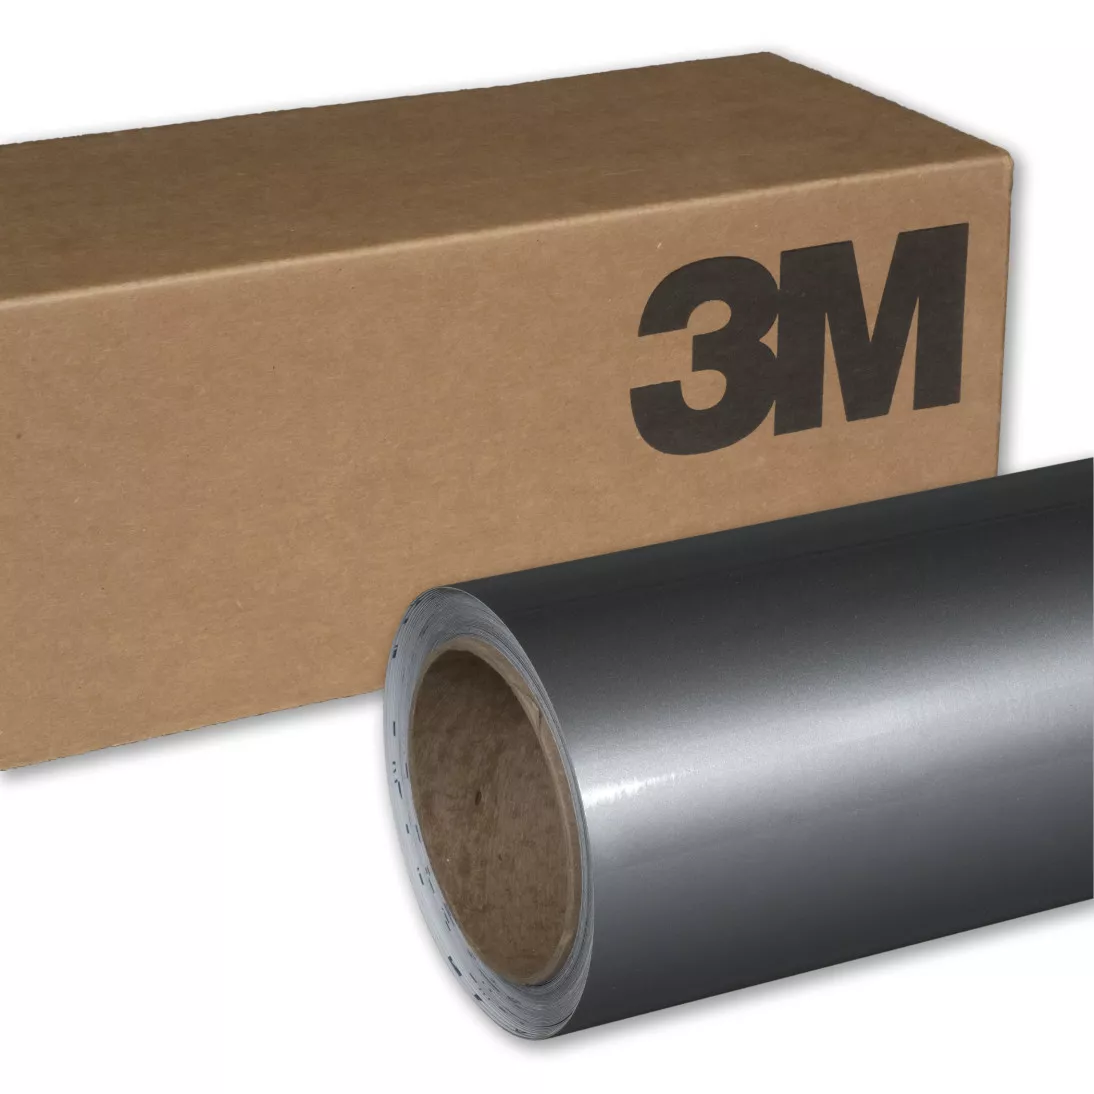 3M™ Wrap Film Series 1080-G251, Gloss Sterling Silver, 60 in x 25 yd